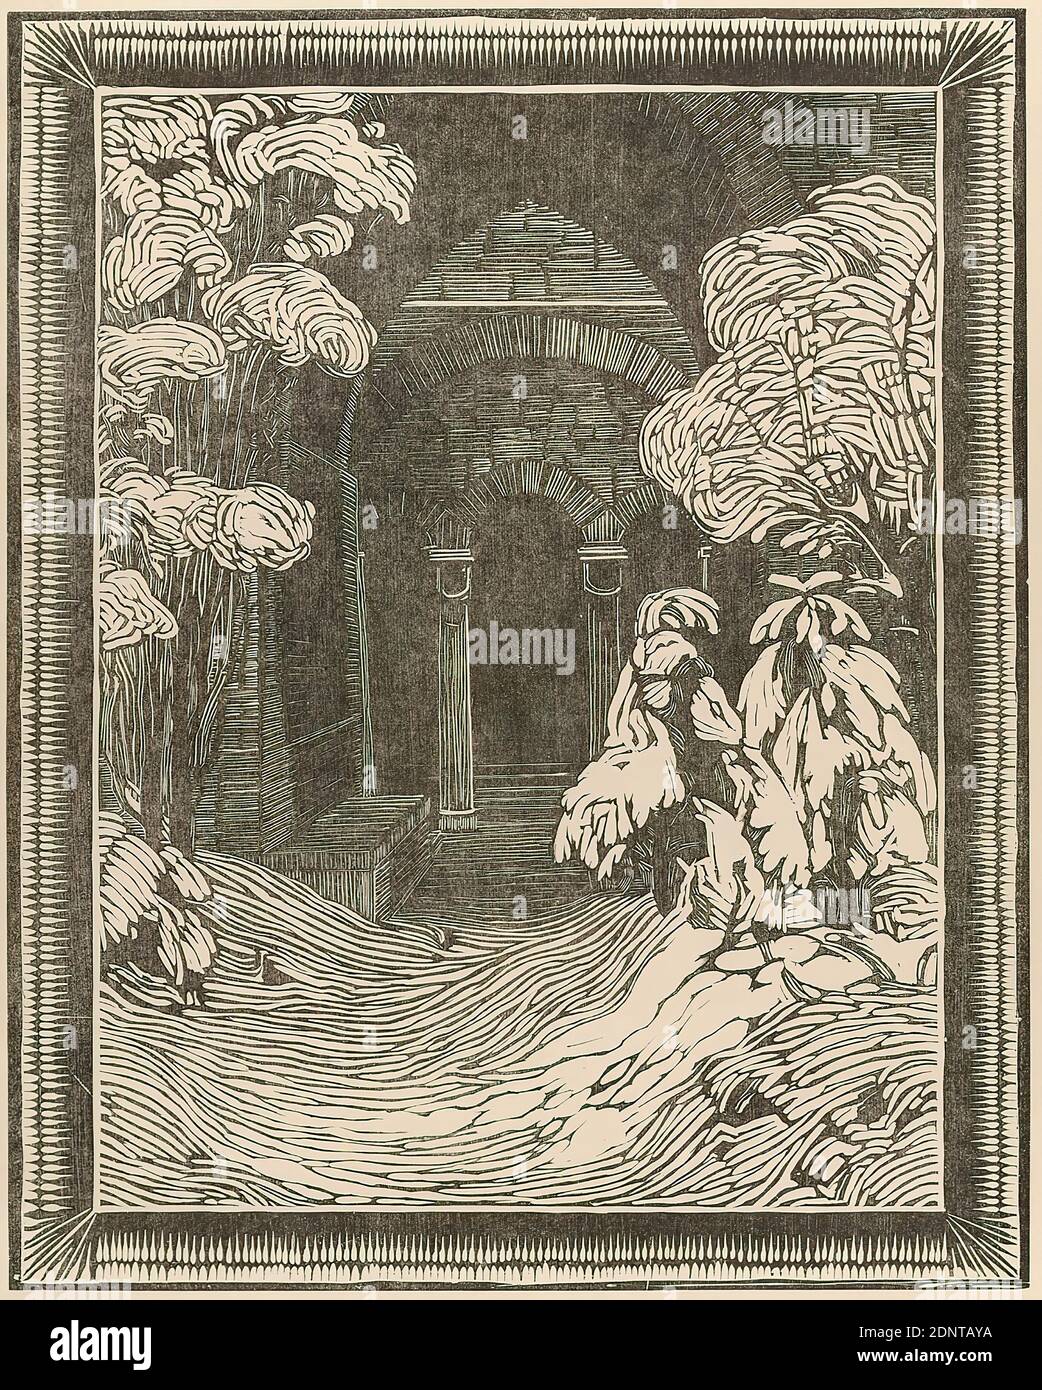 C. F. Winter'sche Buchdruckerei, Peter Behrens, Winter Landscape, Japanese paper, woodcut, woodcut on simile Japanese paper, sheet size: height: 47.7 cm; width: 31.7 cm, inscribed: recto u.: by someone else: Peter Behrens, Winter Landscape. Pan Bd V n S 240, illustrations, prints, printed matter, landscapes (temperate zone), architecture, portal (church building), exterior of a church, art nouveau Stock Photo